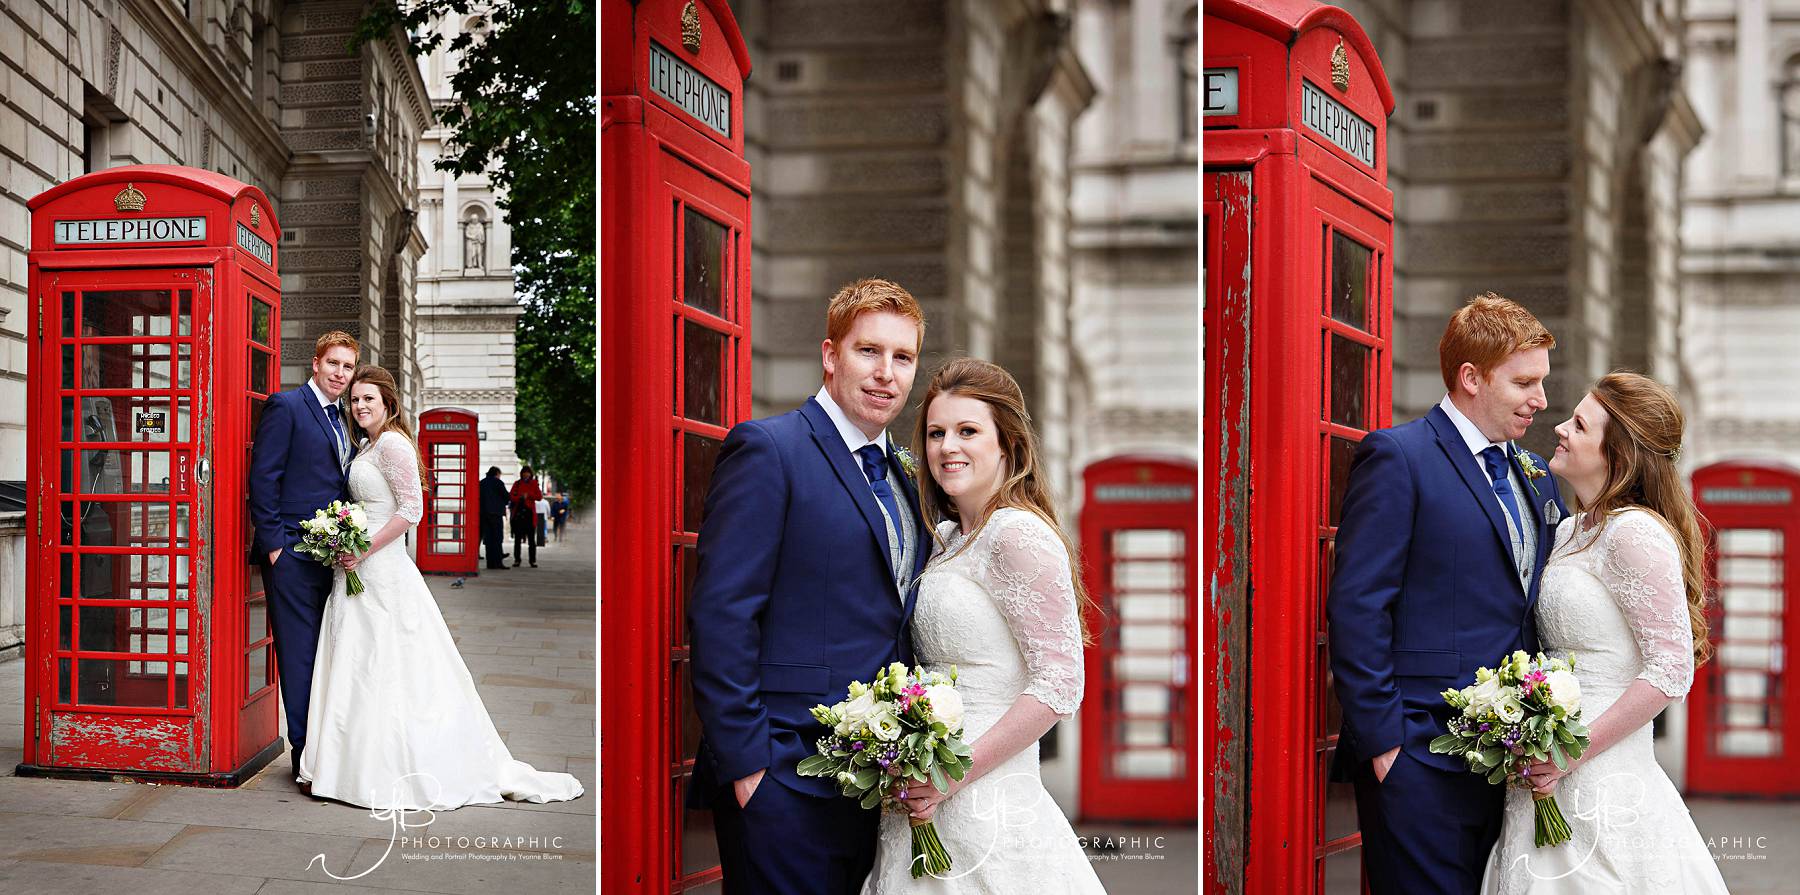 Westminster wedding portraits featuring red London phone box by YBPHOTOGRAPHIC